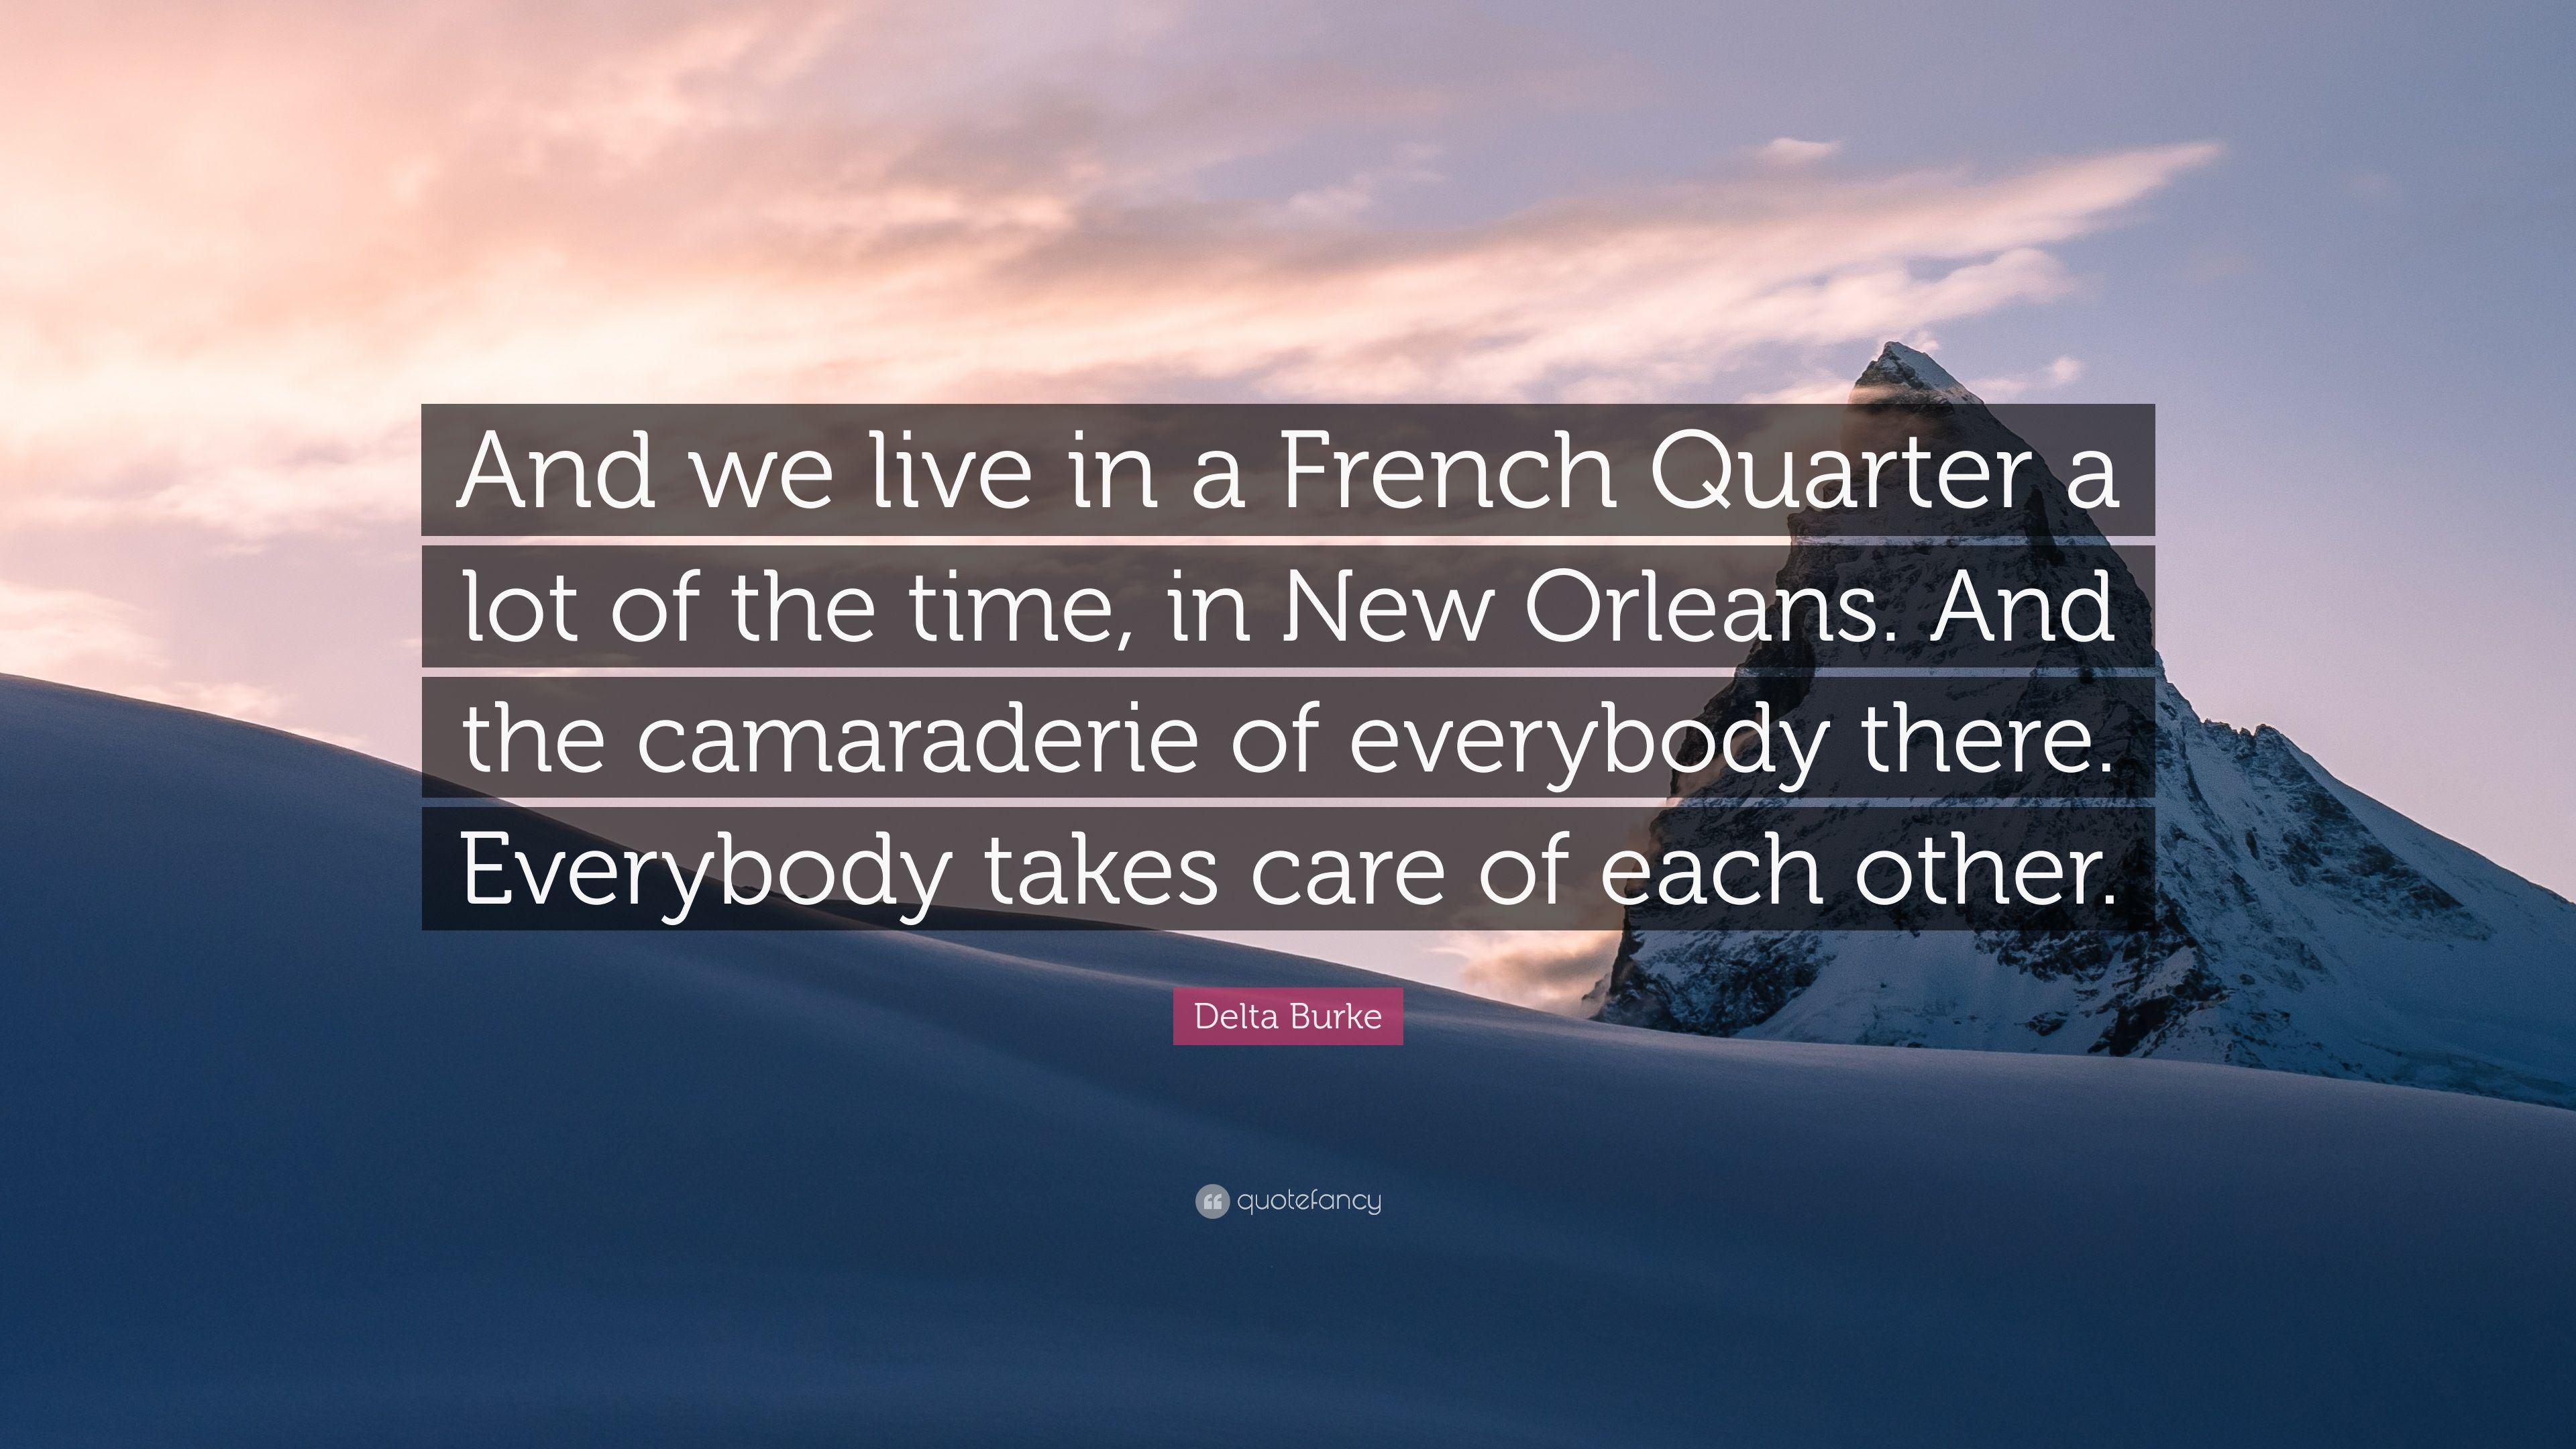 Delta Burke Quote: “And we live in a French Quarter a lot